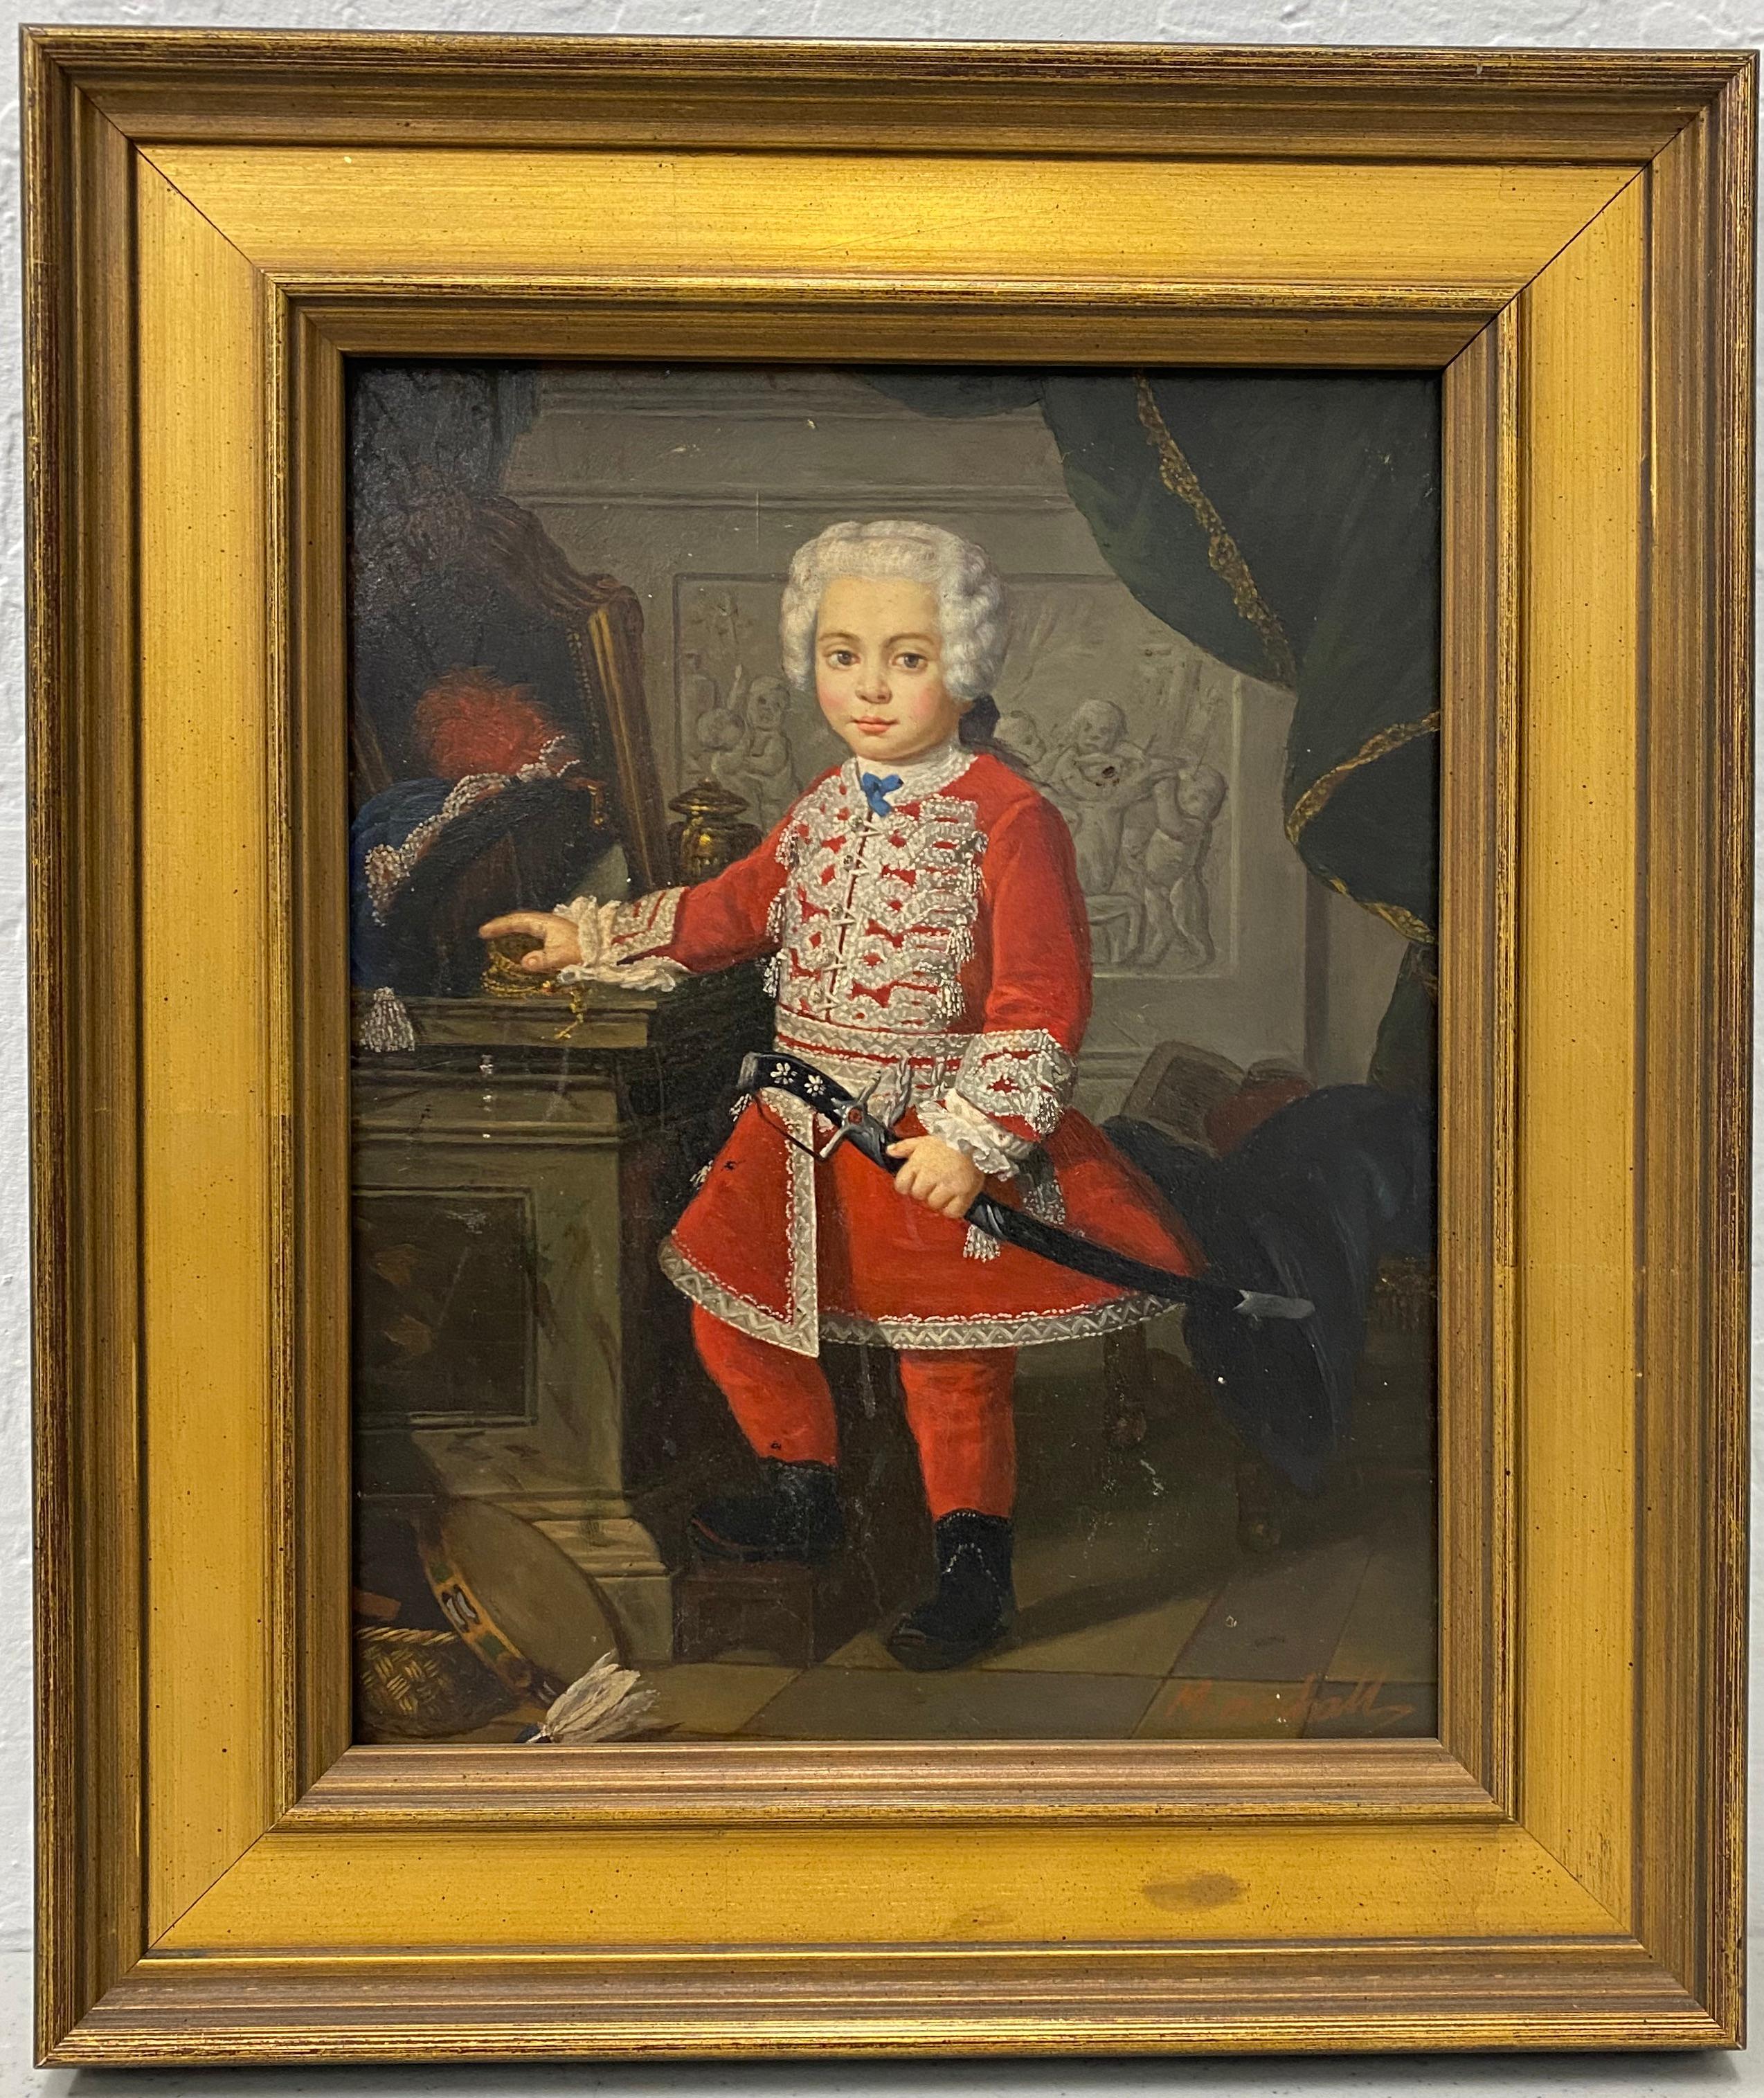 M. Moshall "The Young King" Original Oil Painting Early 20th C.